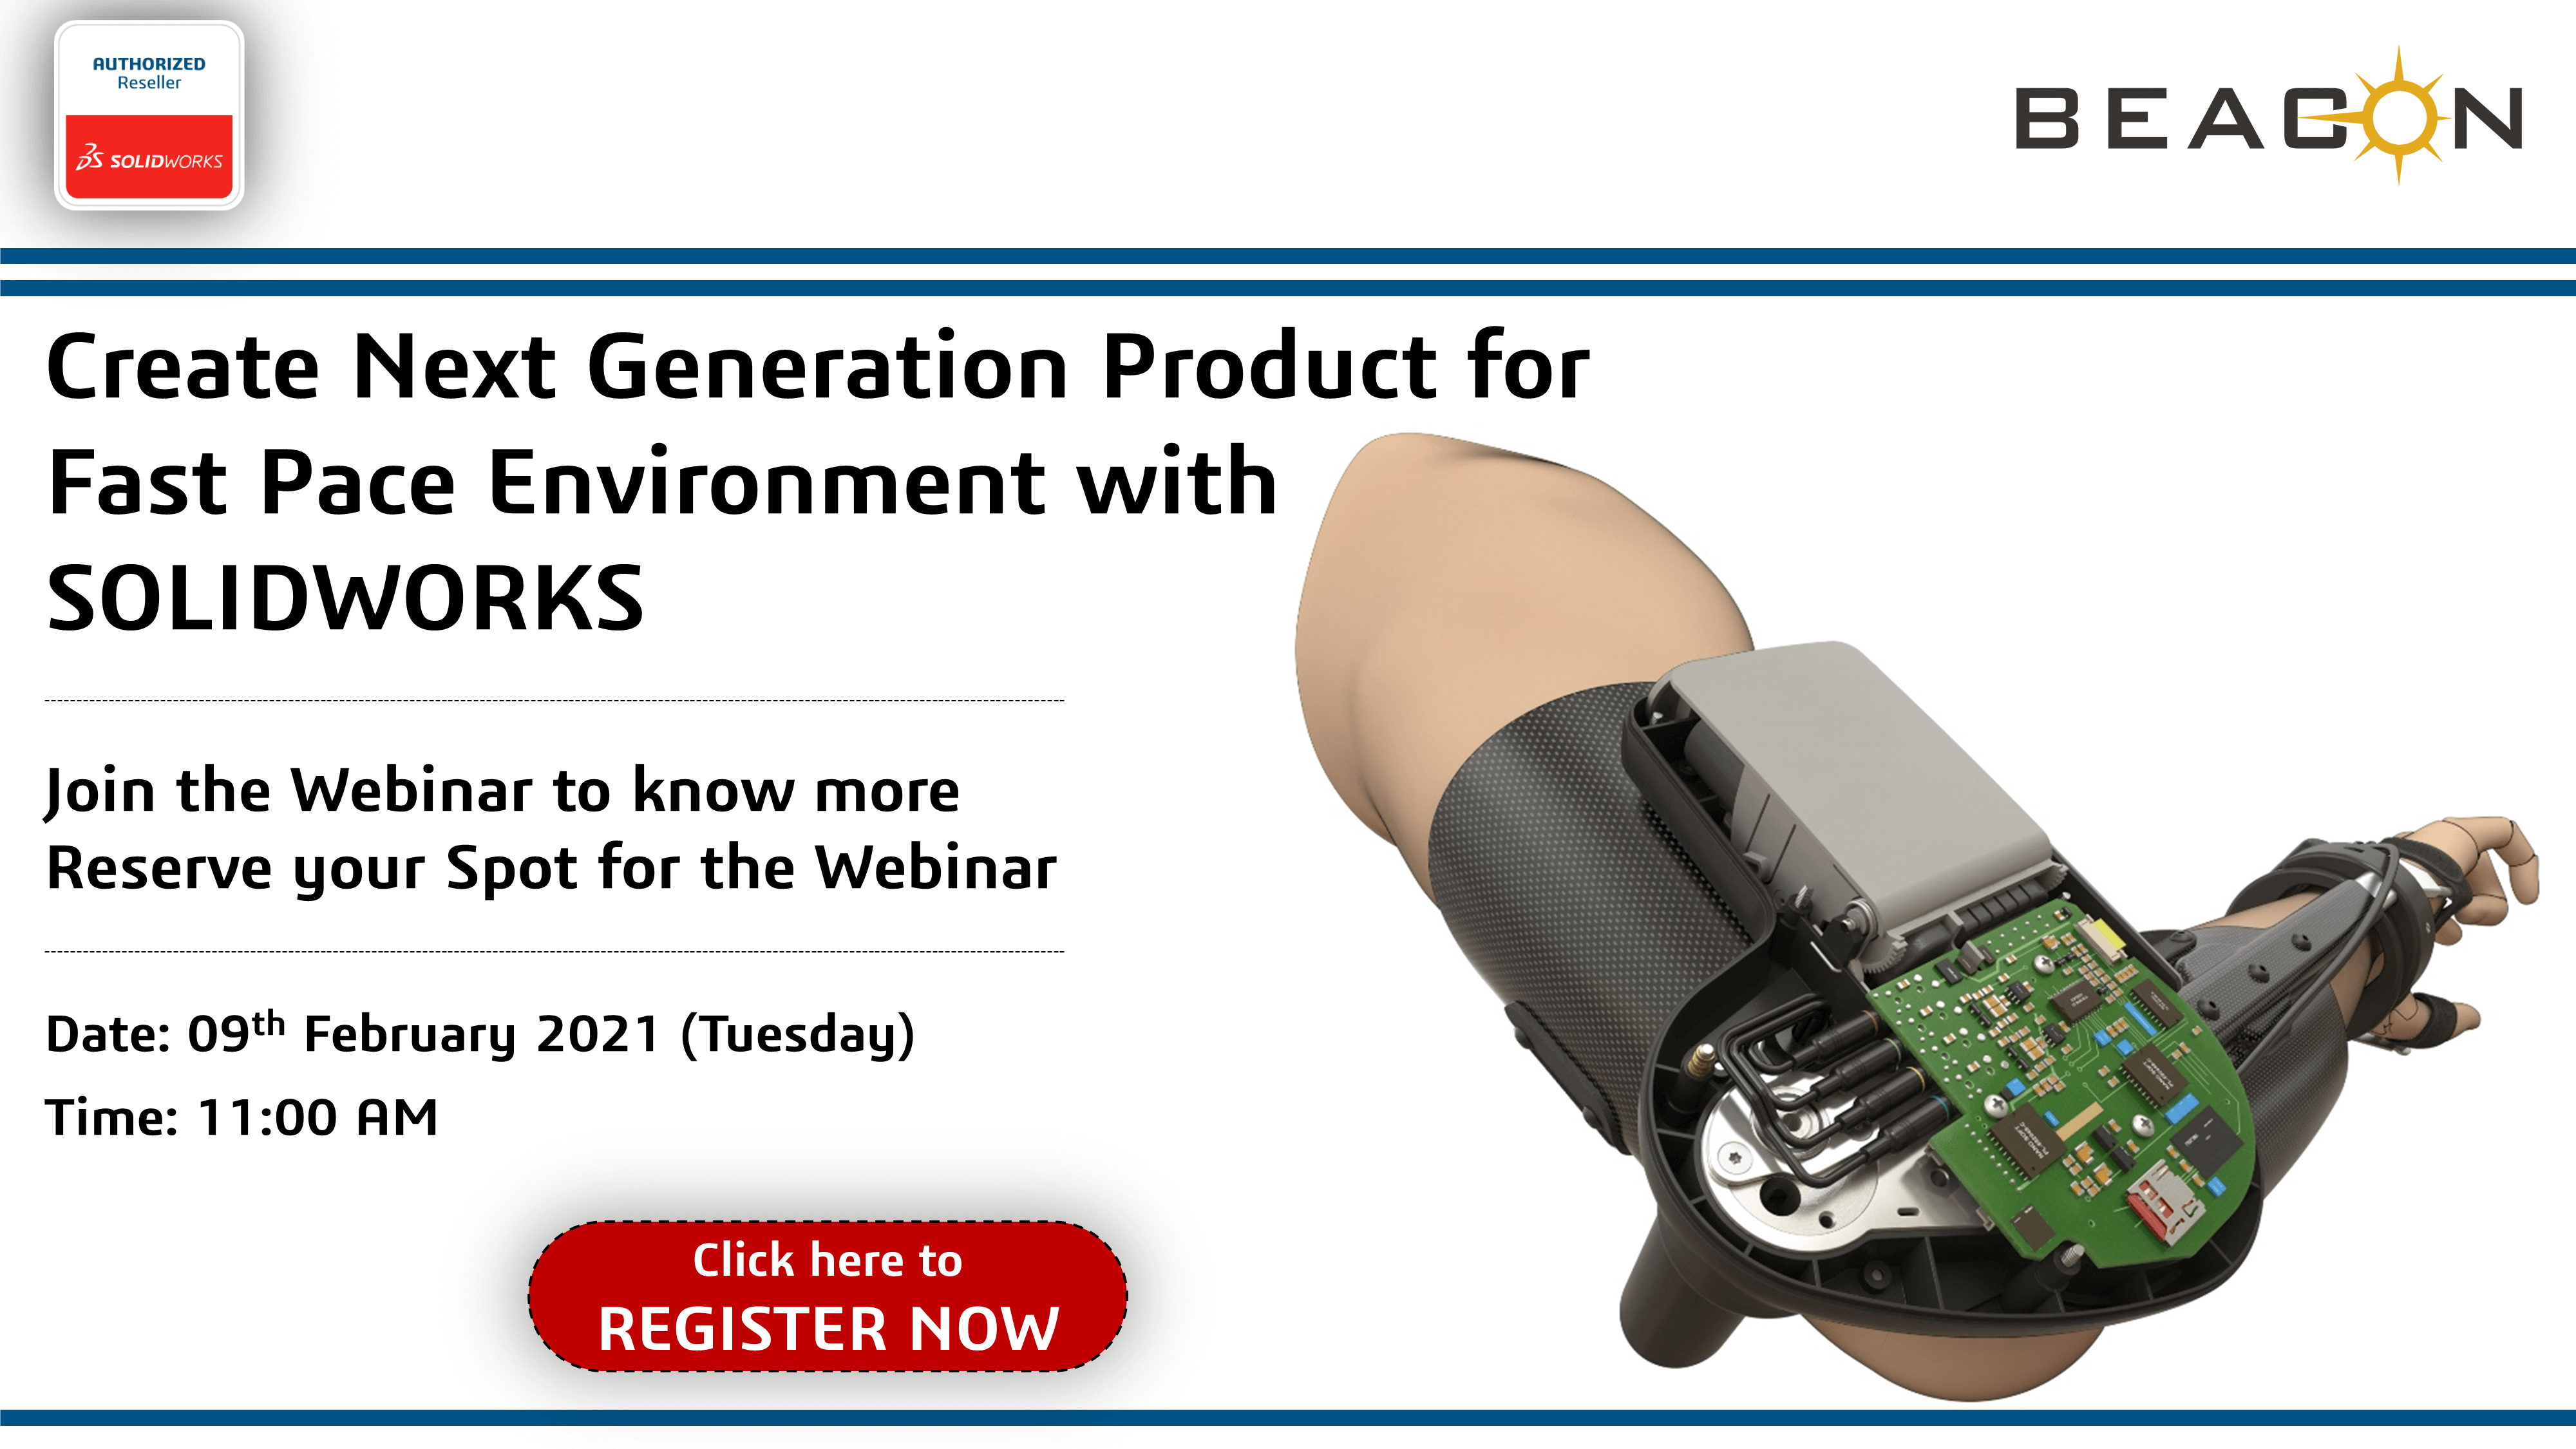 Create Next Generation Product for Fast Pace Environment with SOLIDWORKS